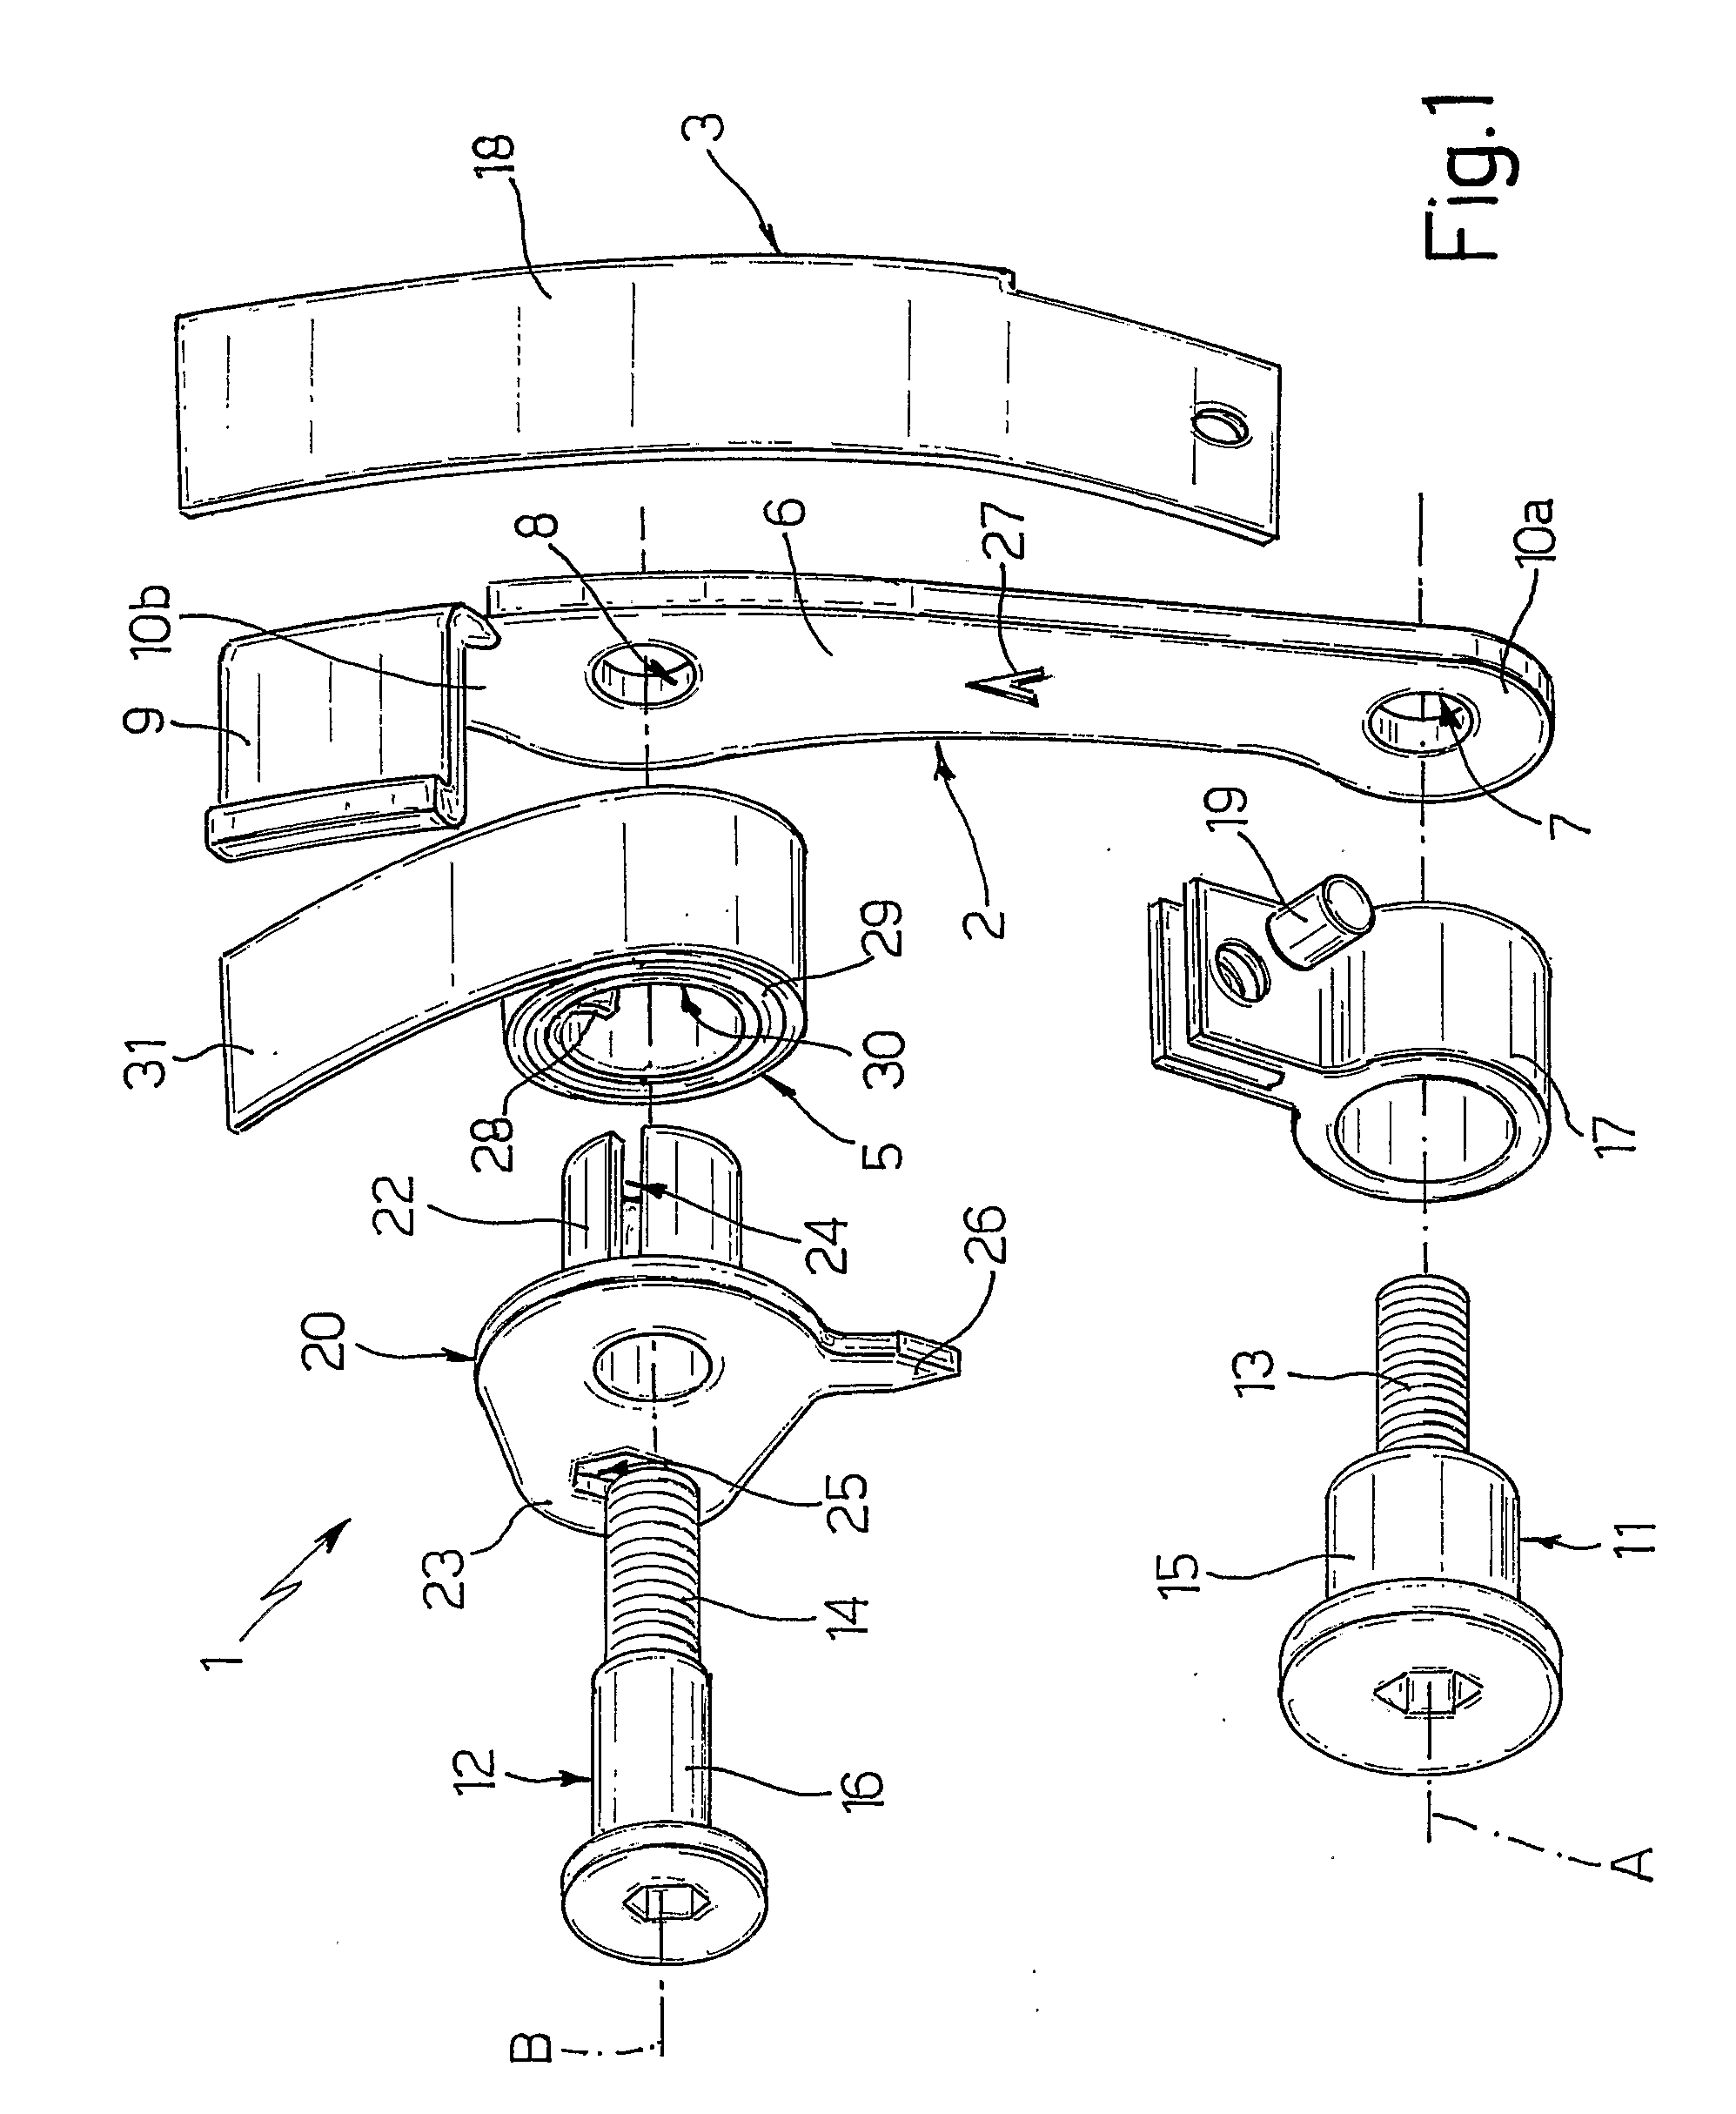 Shoe Tensioner for a Synchronous Belt Drive for Use With Oil